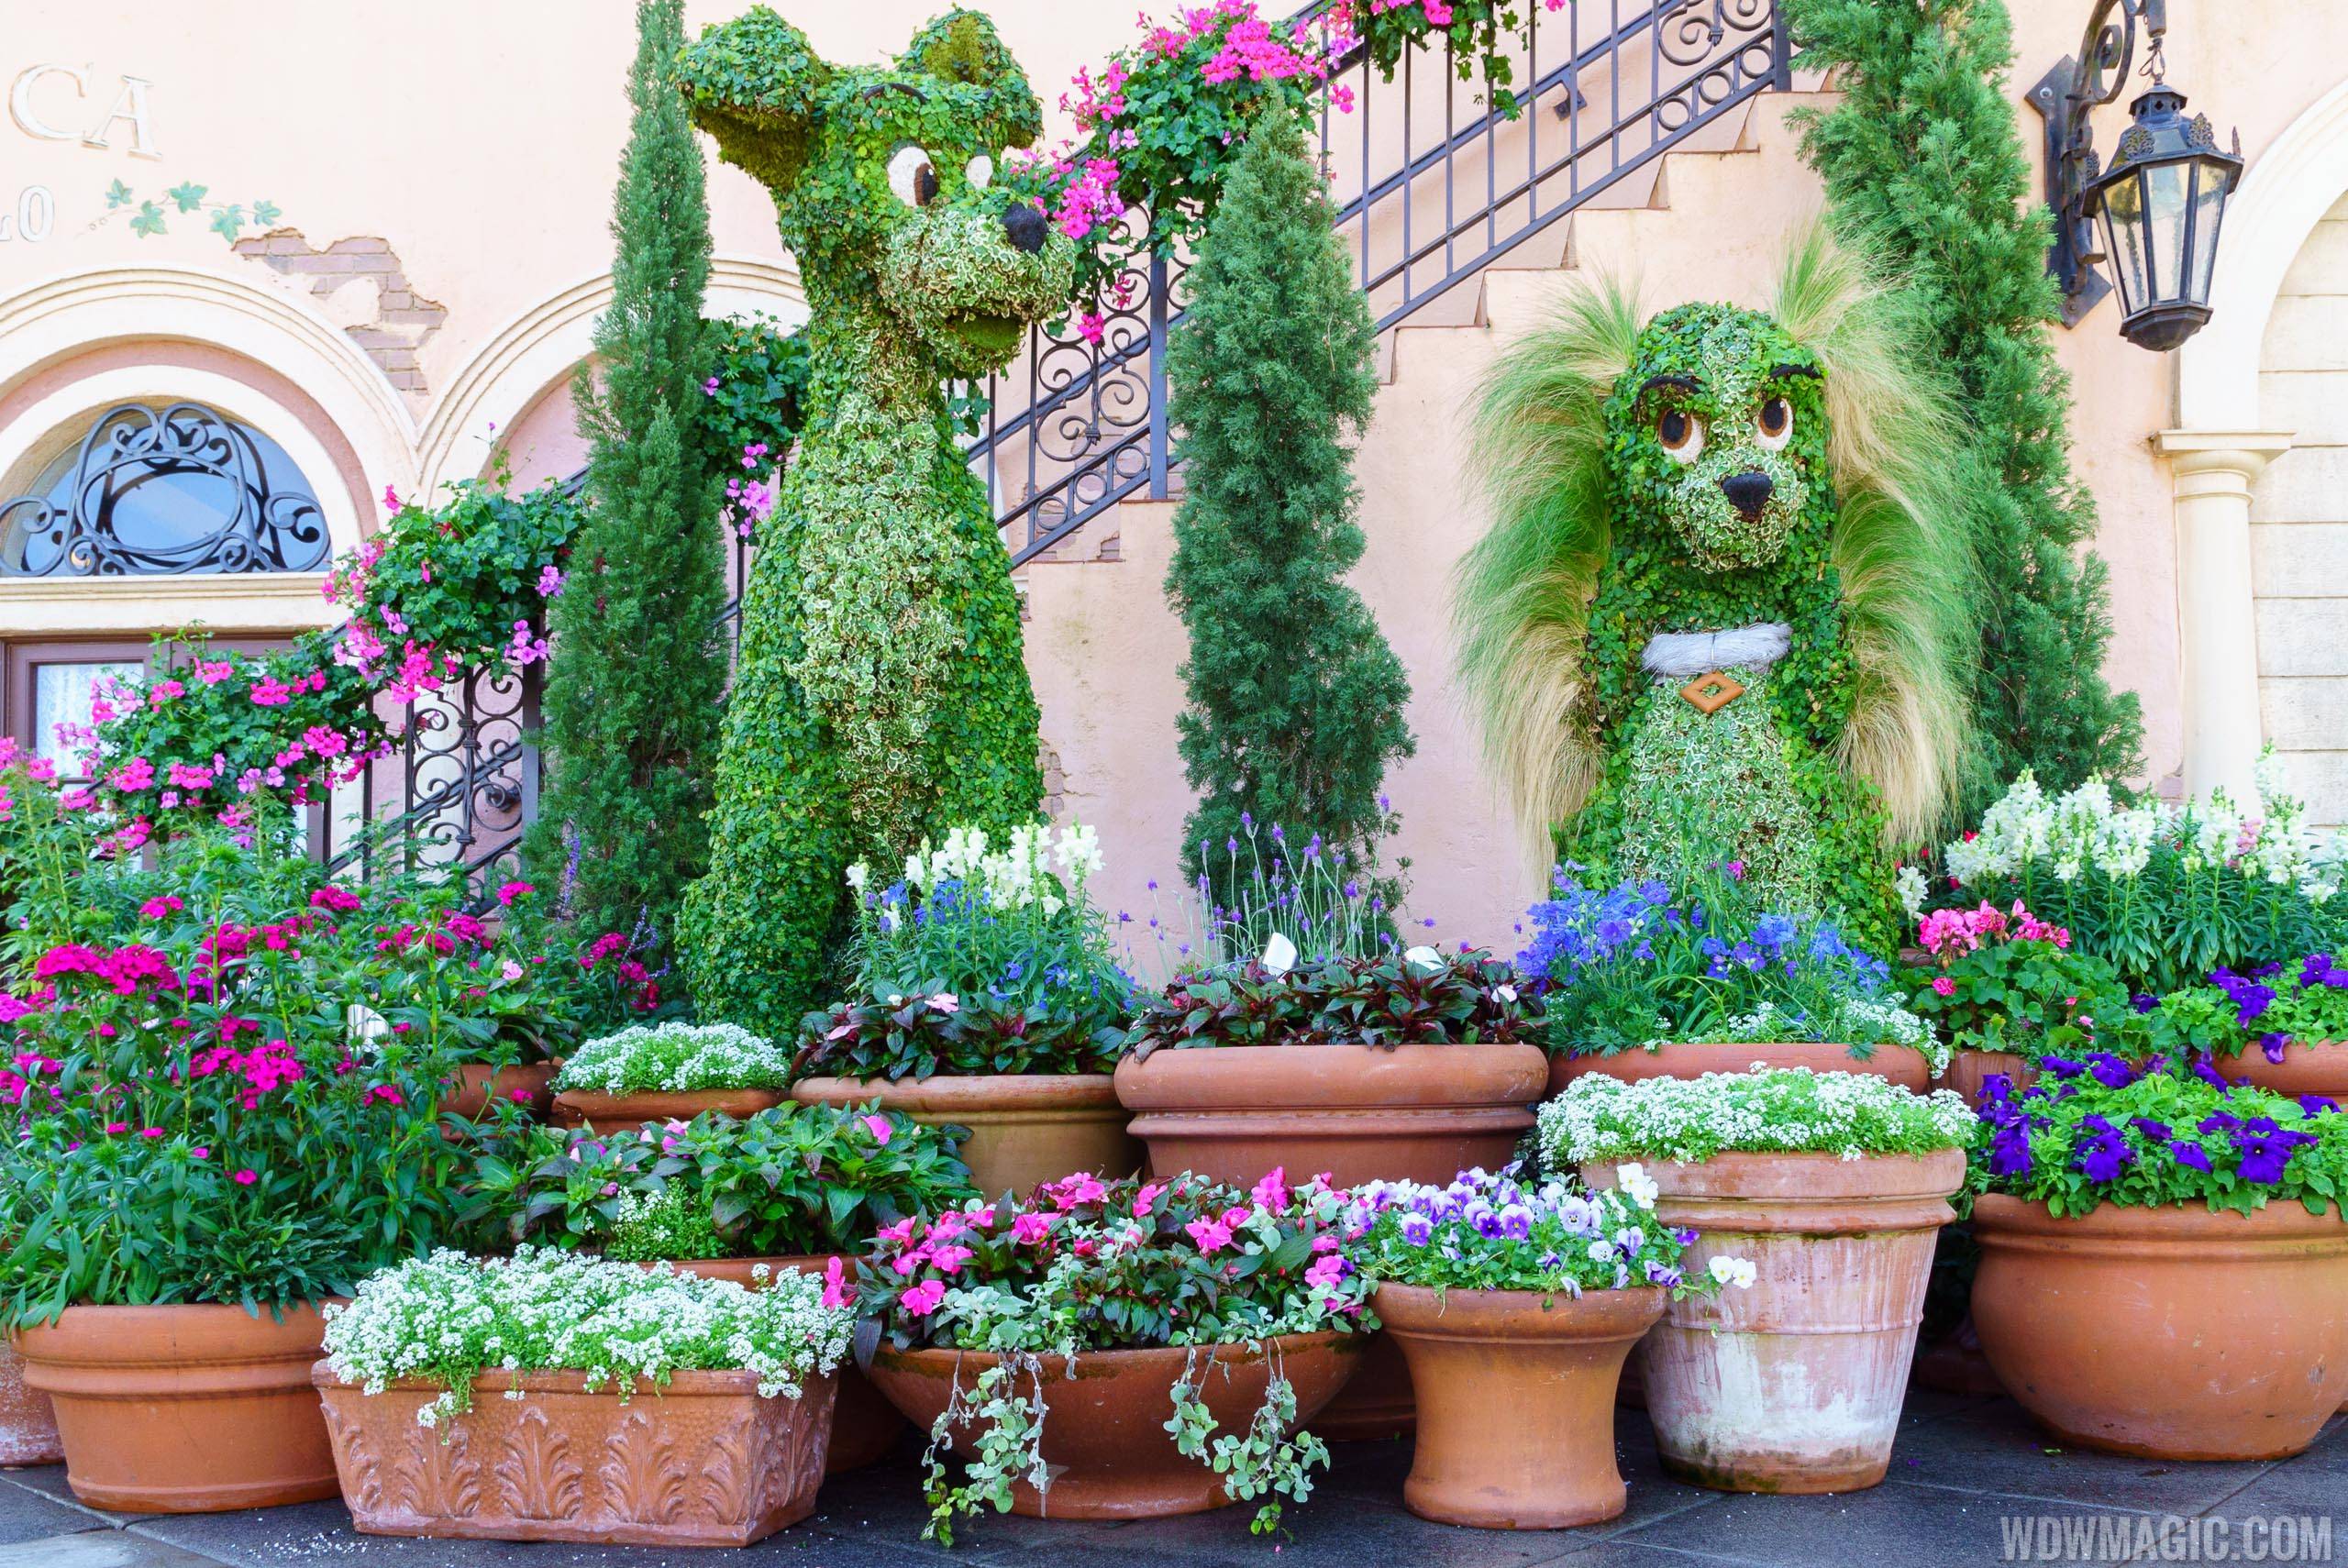 2016 Epcot International Flower and Garden Festival - Lady and the Tramp topiary